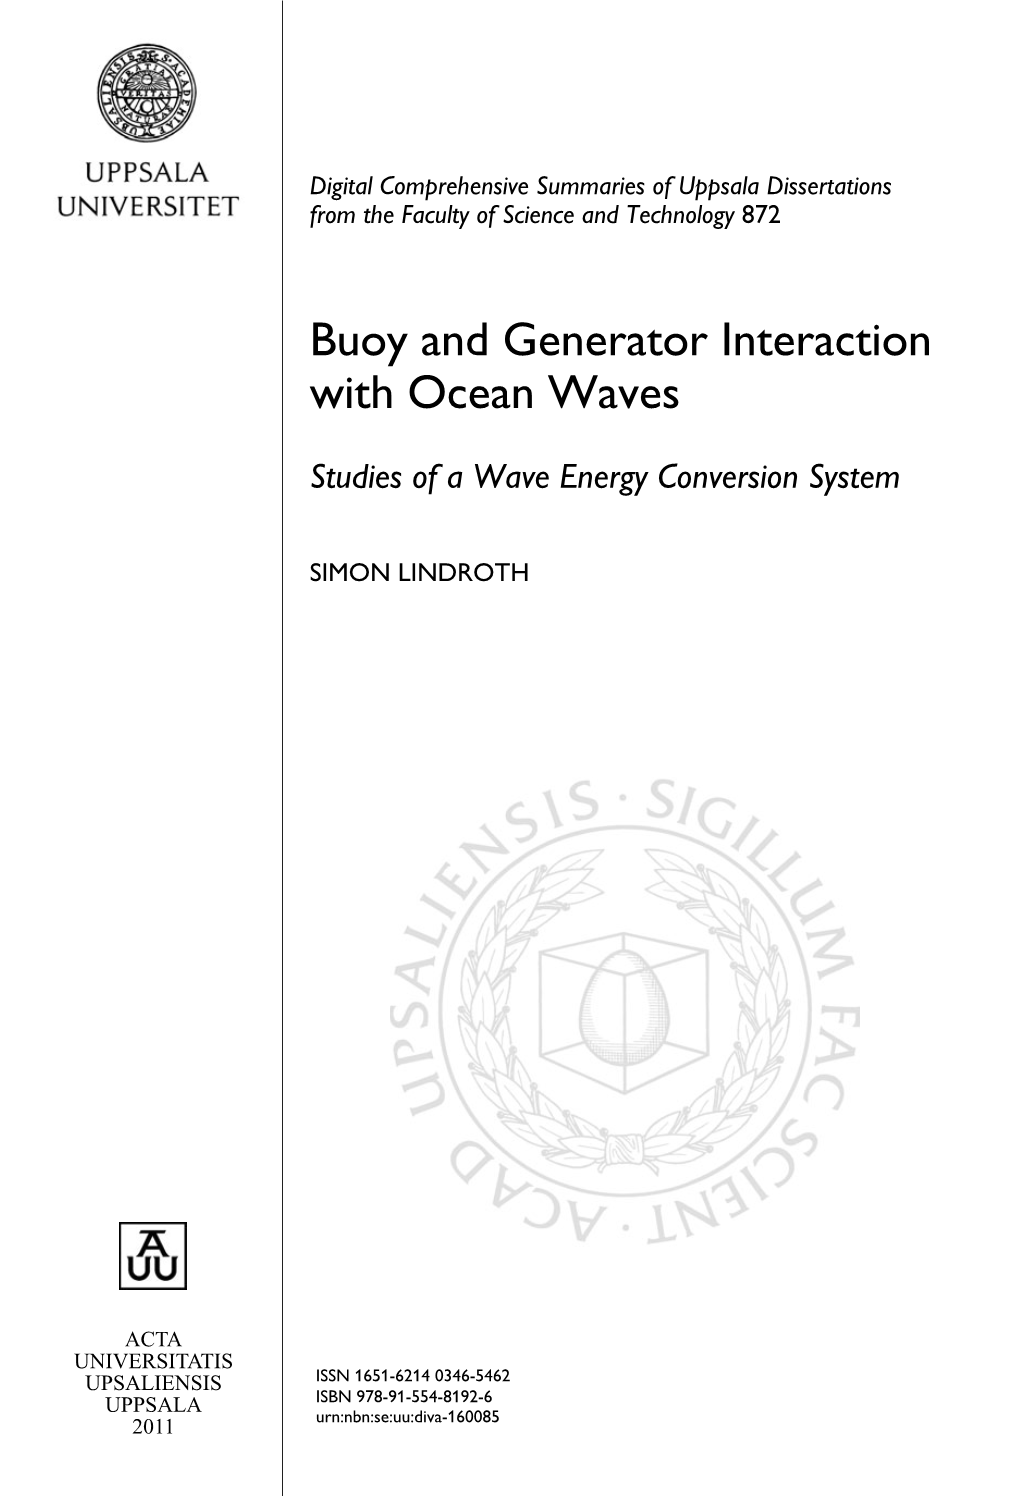 Buoy and Generator Interaction with Ocean Waves